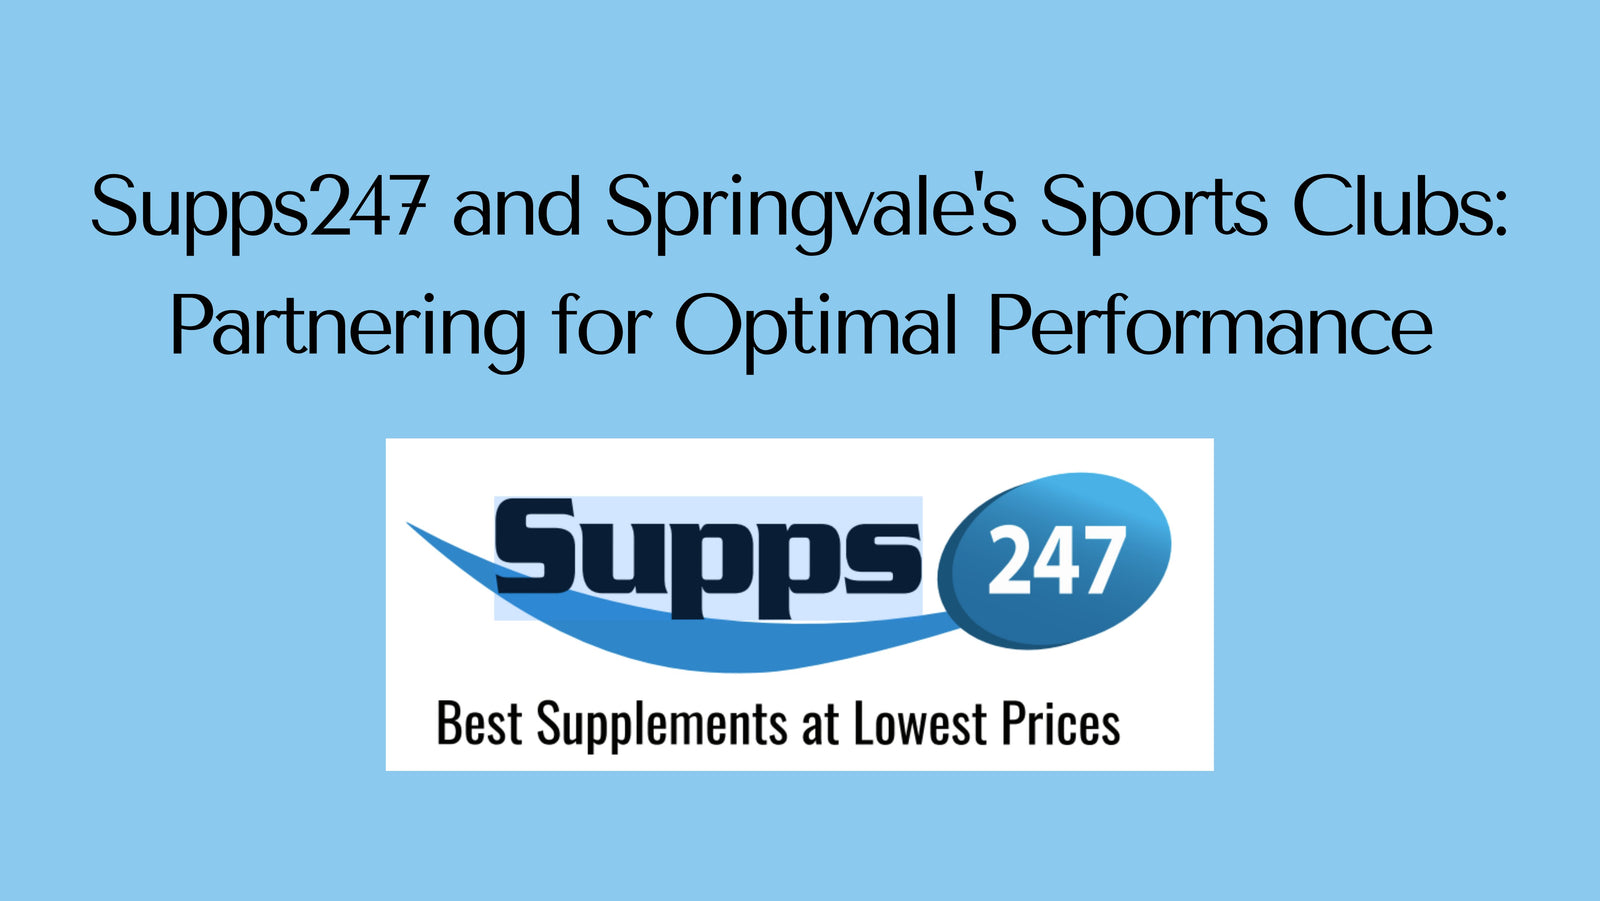 Supps247 and Springvale's Sports Clubs: Partnering for Optimal Performance